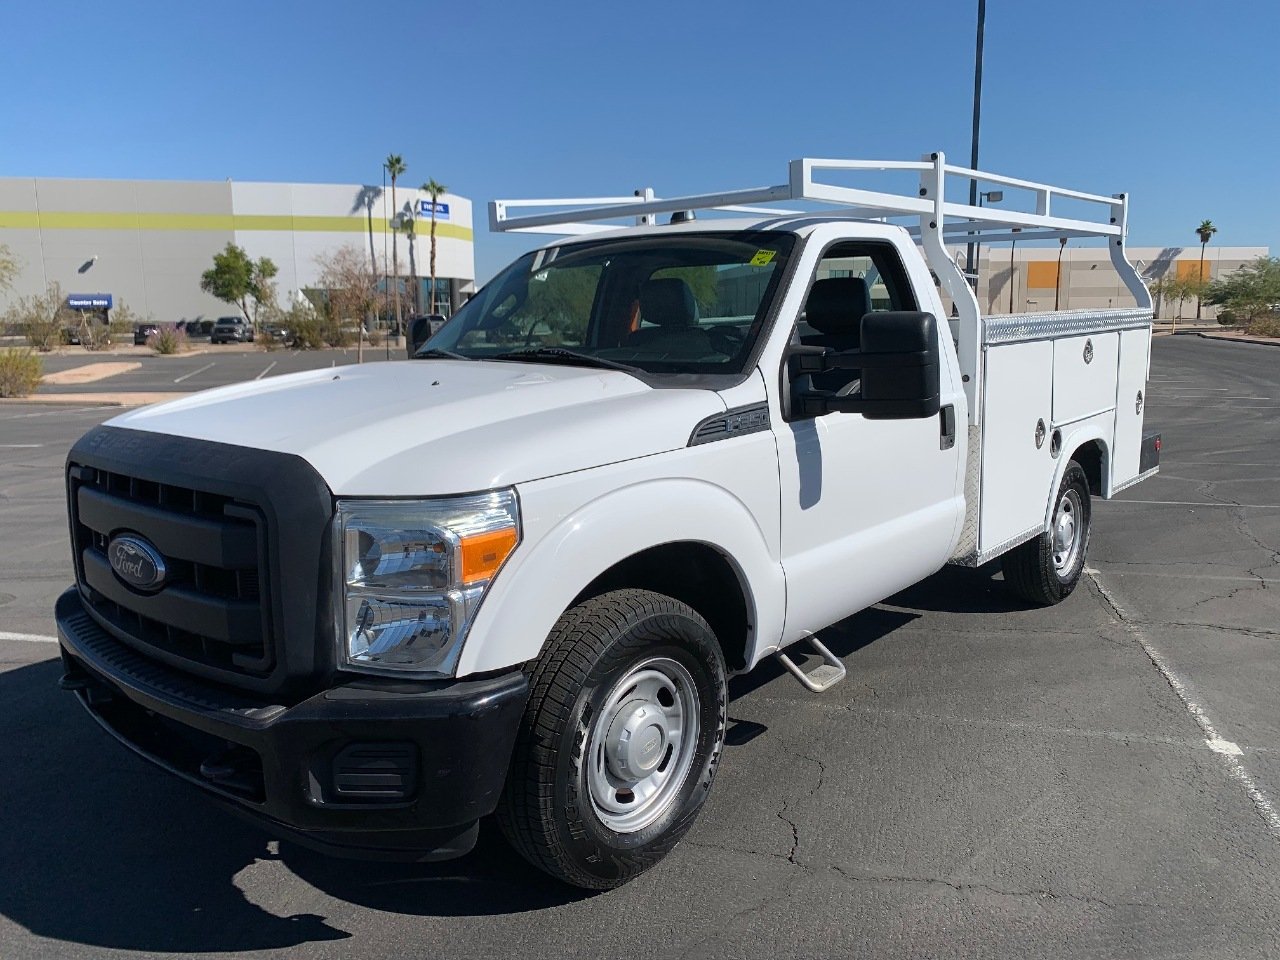 USED 2013 FORD F350 SRW SERVICE - UTILITY TRUCK #3215